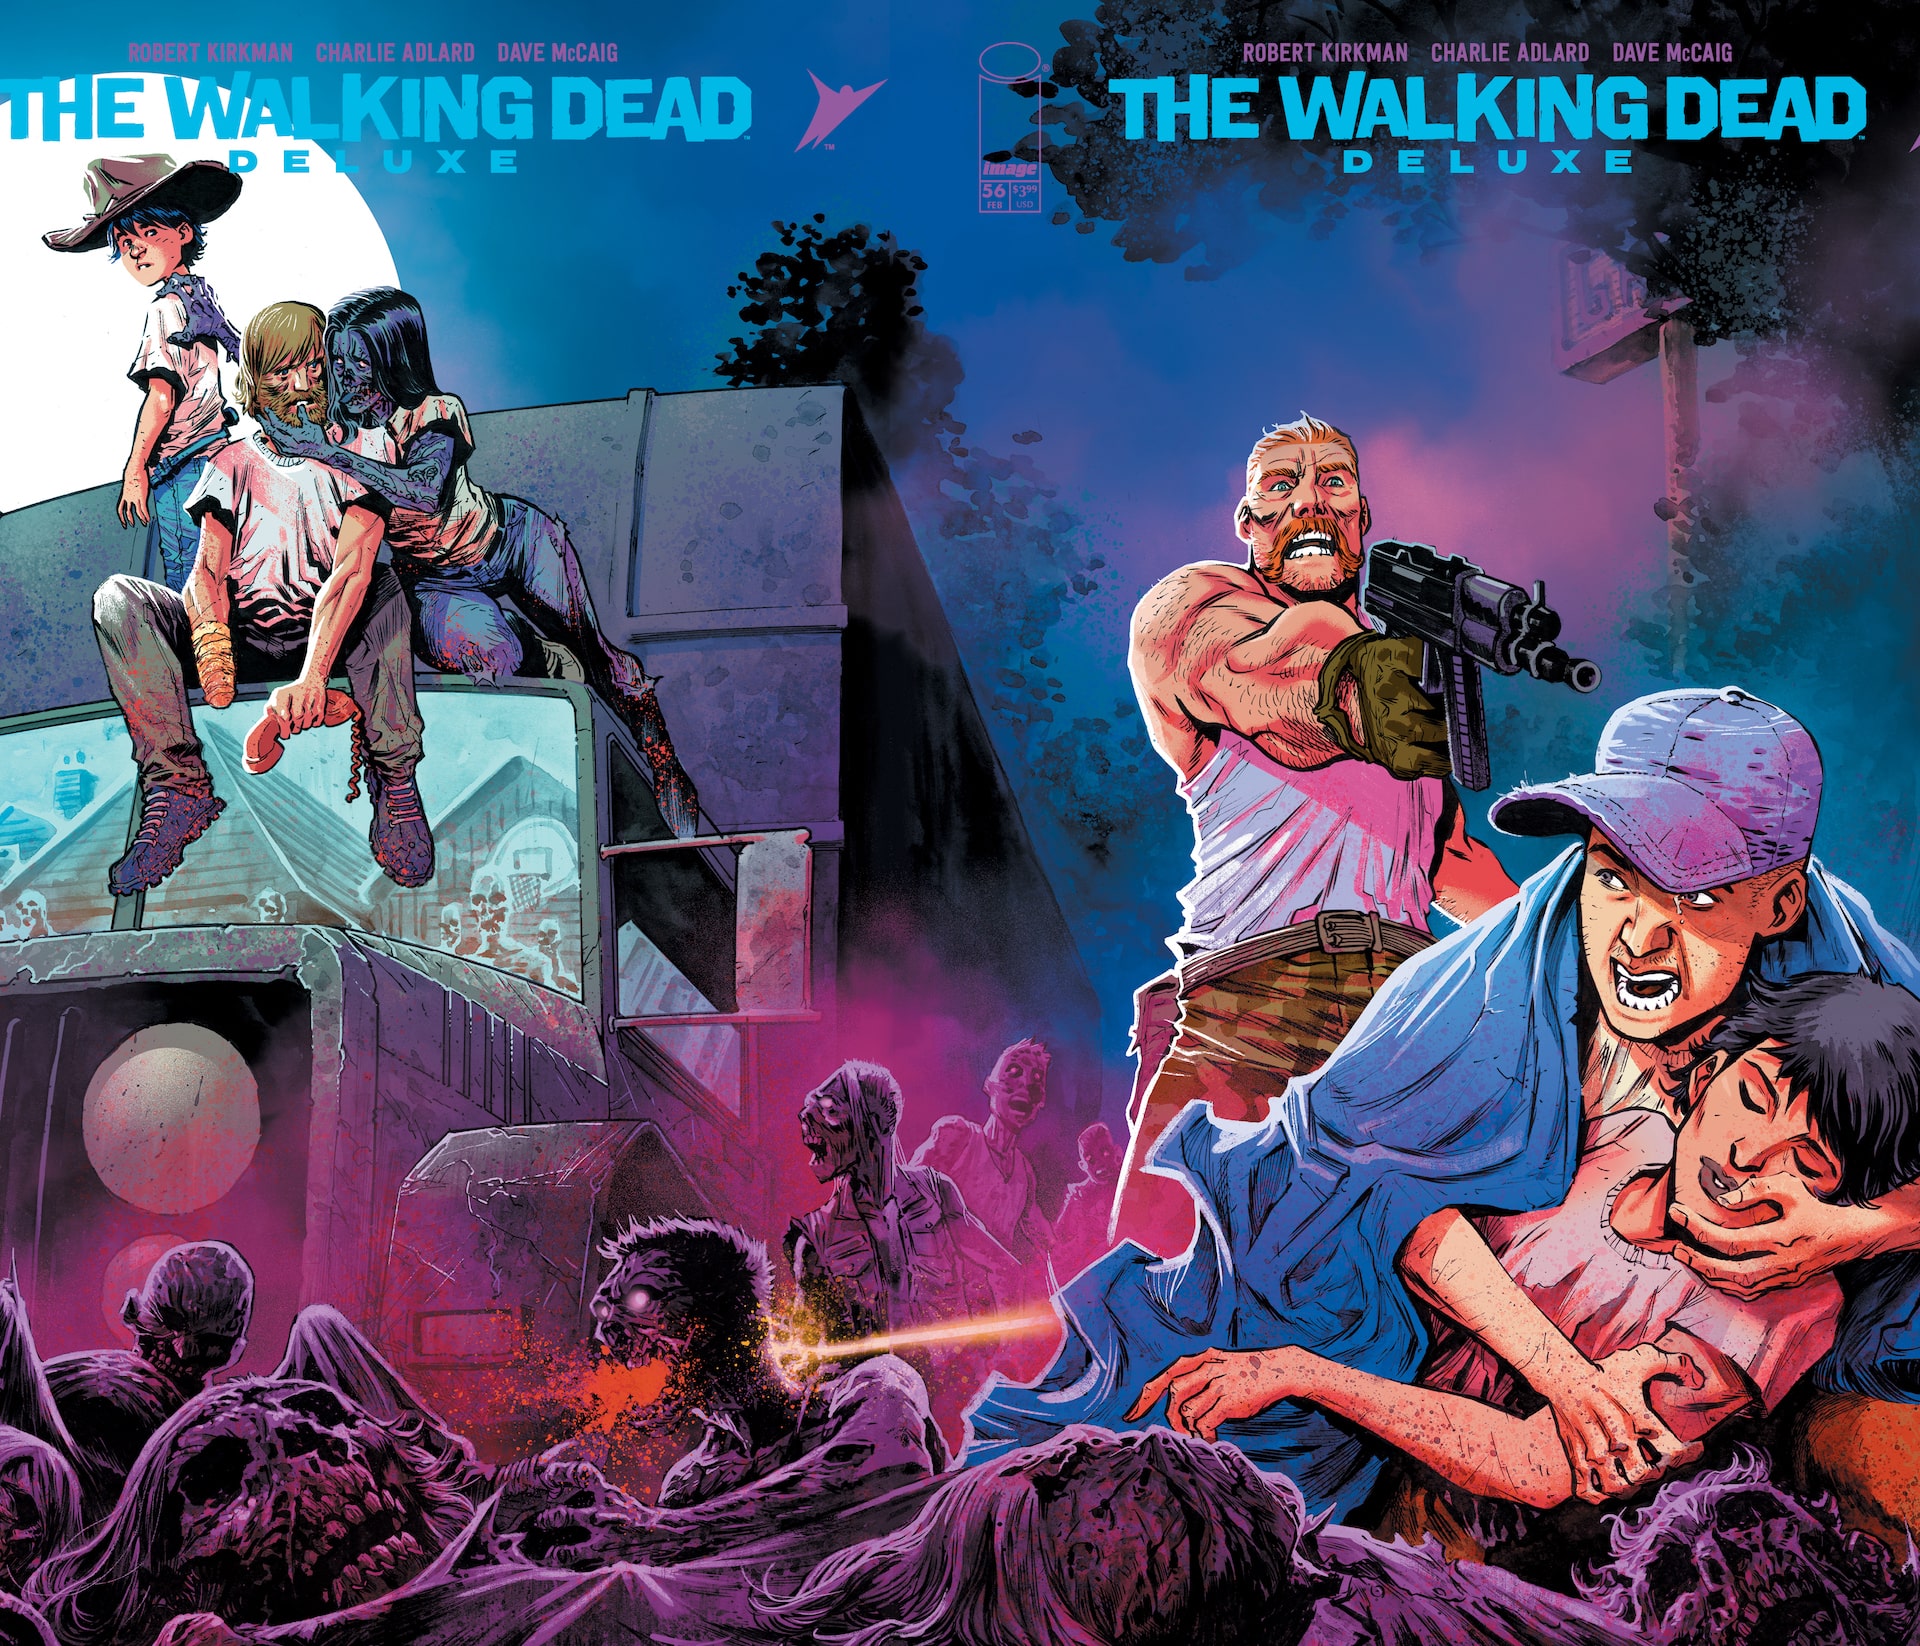 Francis Manapul 'The Walking Dead Deluxe' connecting cover variant revealed